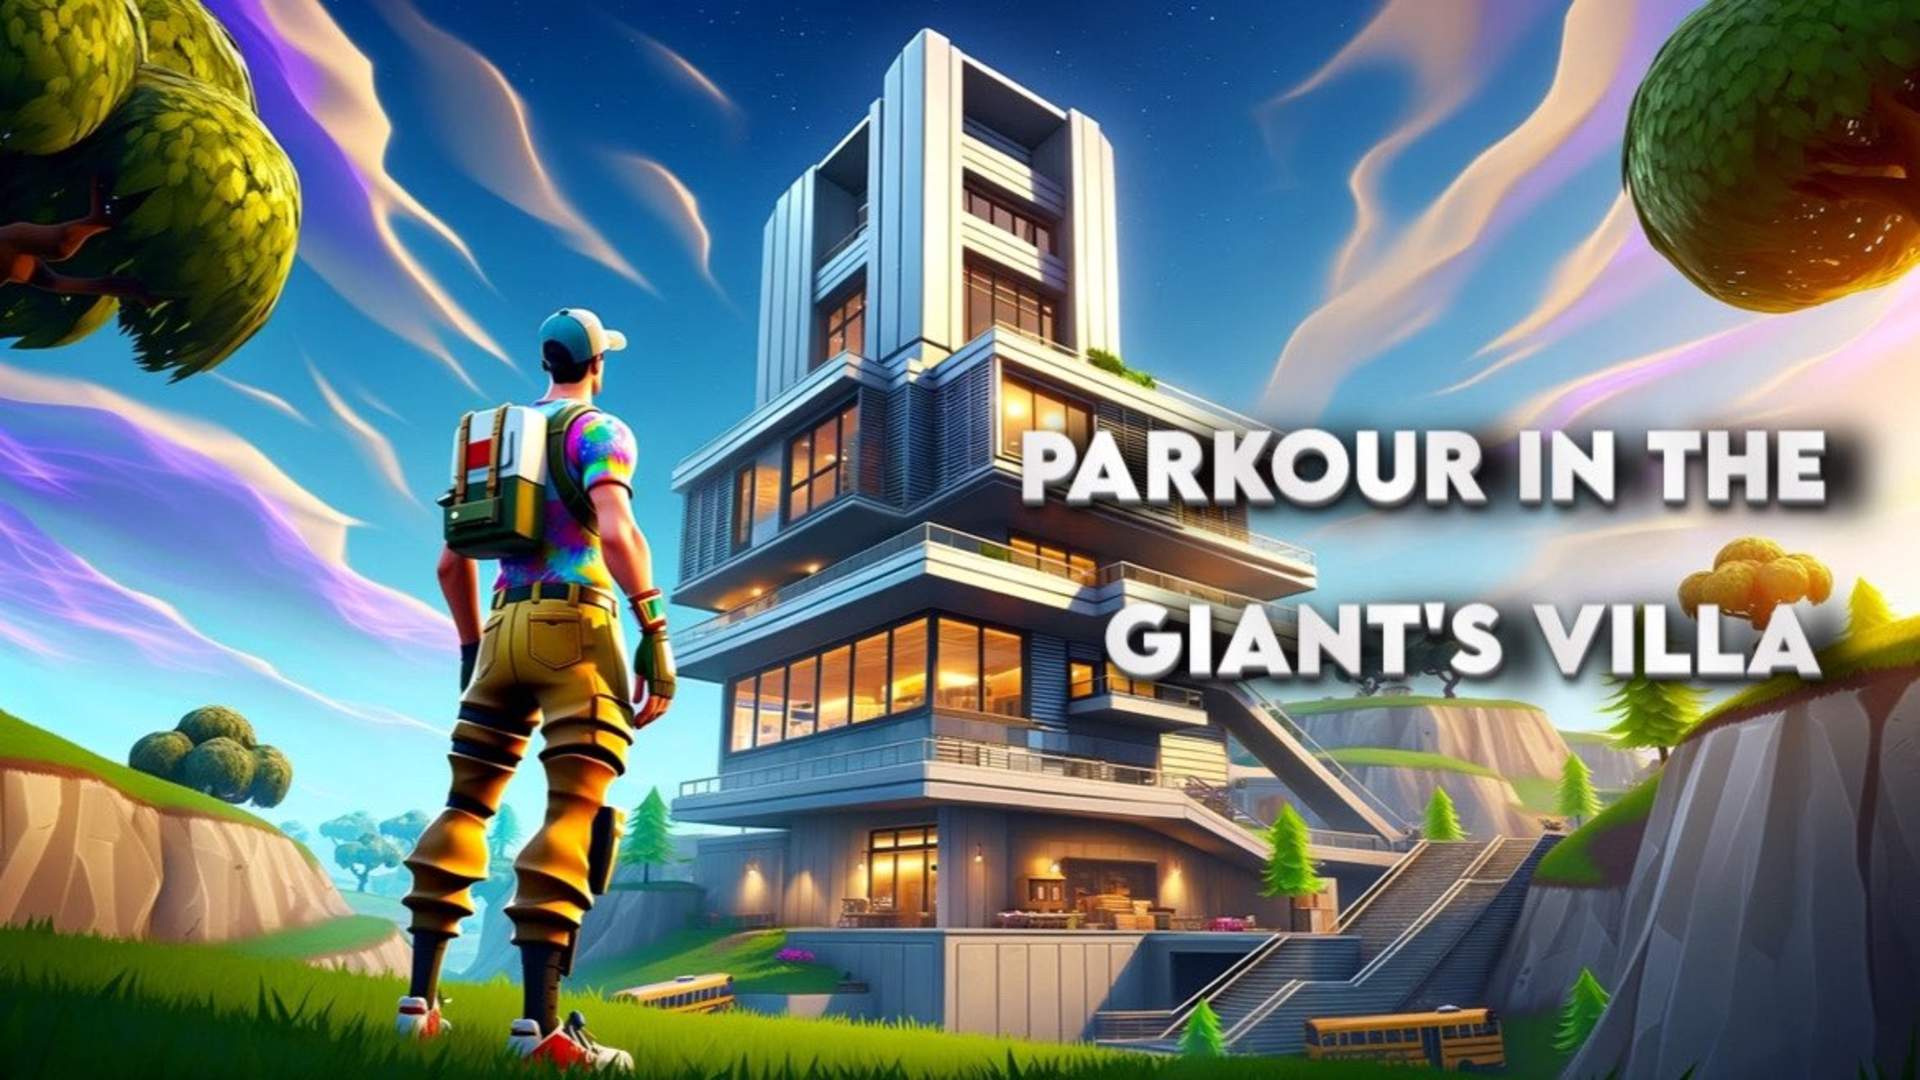 Parkour in the giant's villa